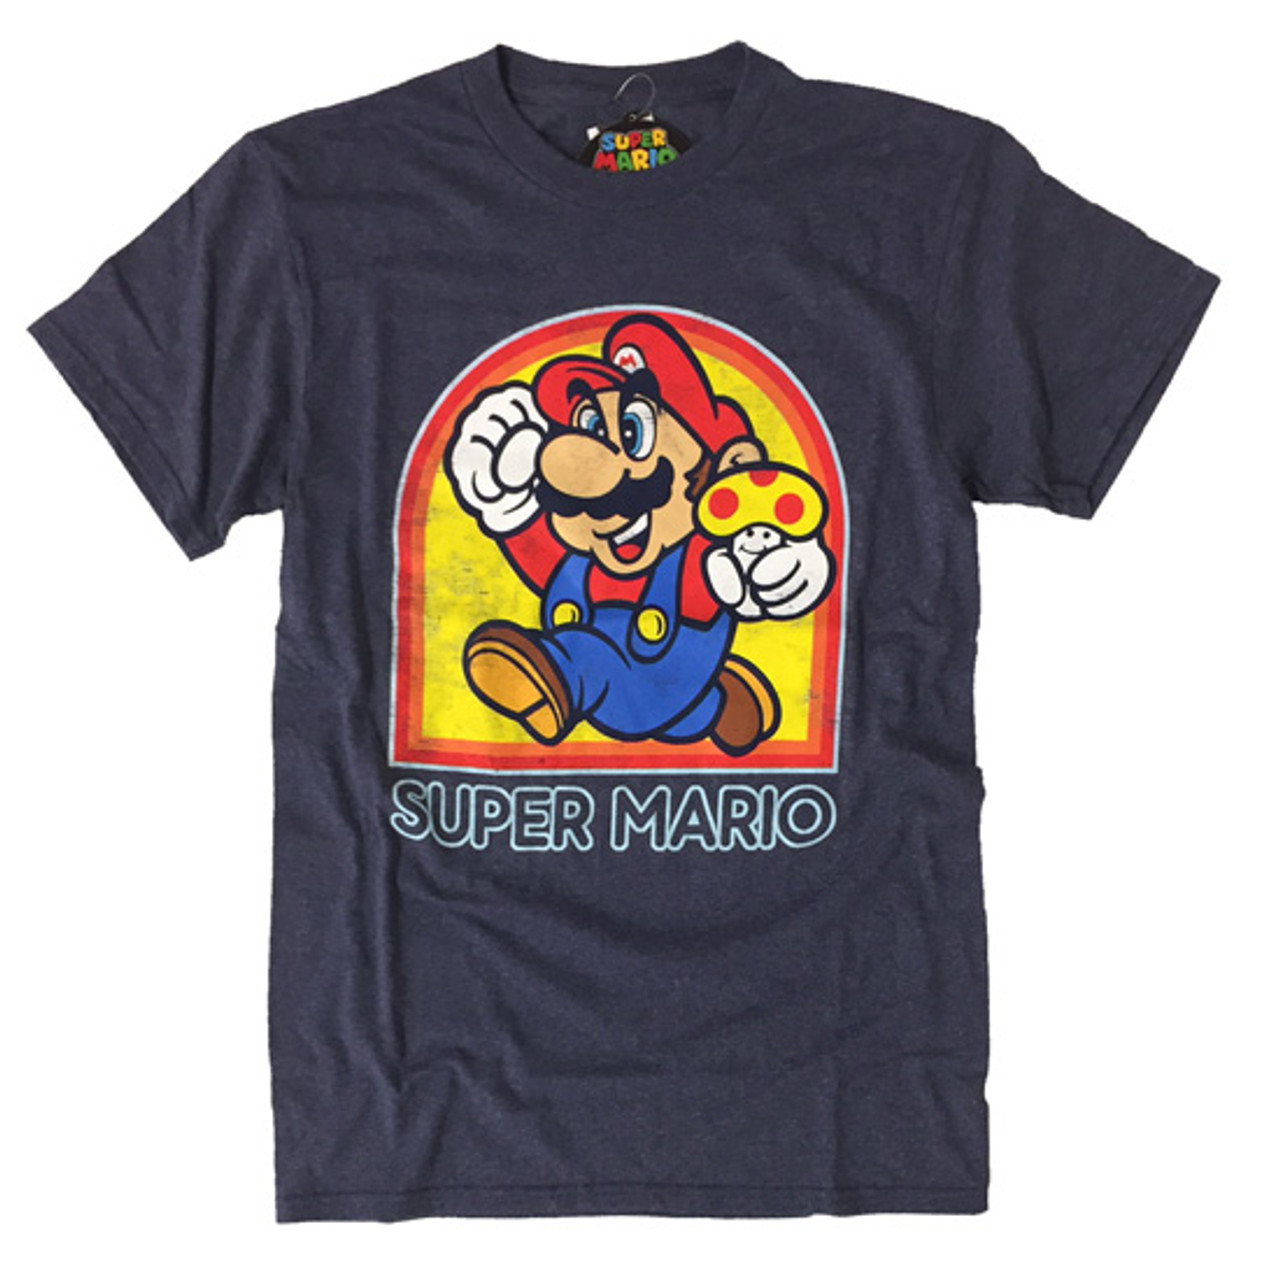 Super Mario Official Nintendo Licensed T-Shirt For Sale | DKOldies